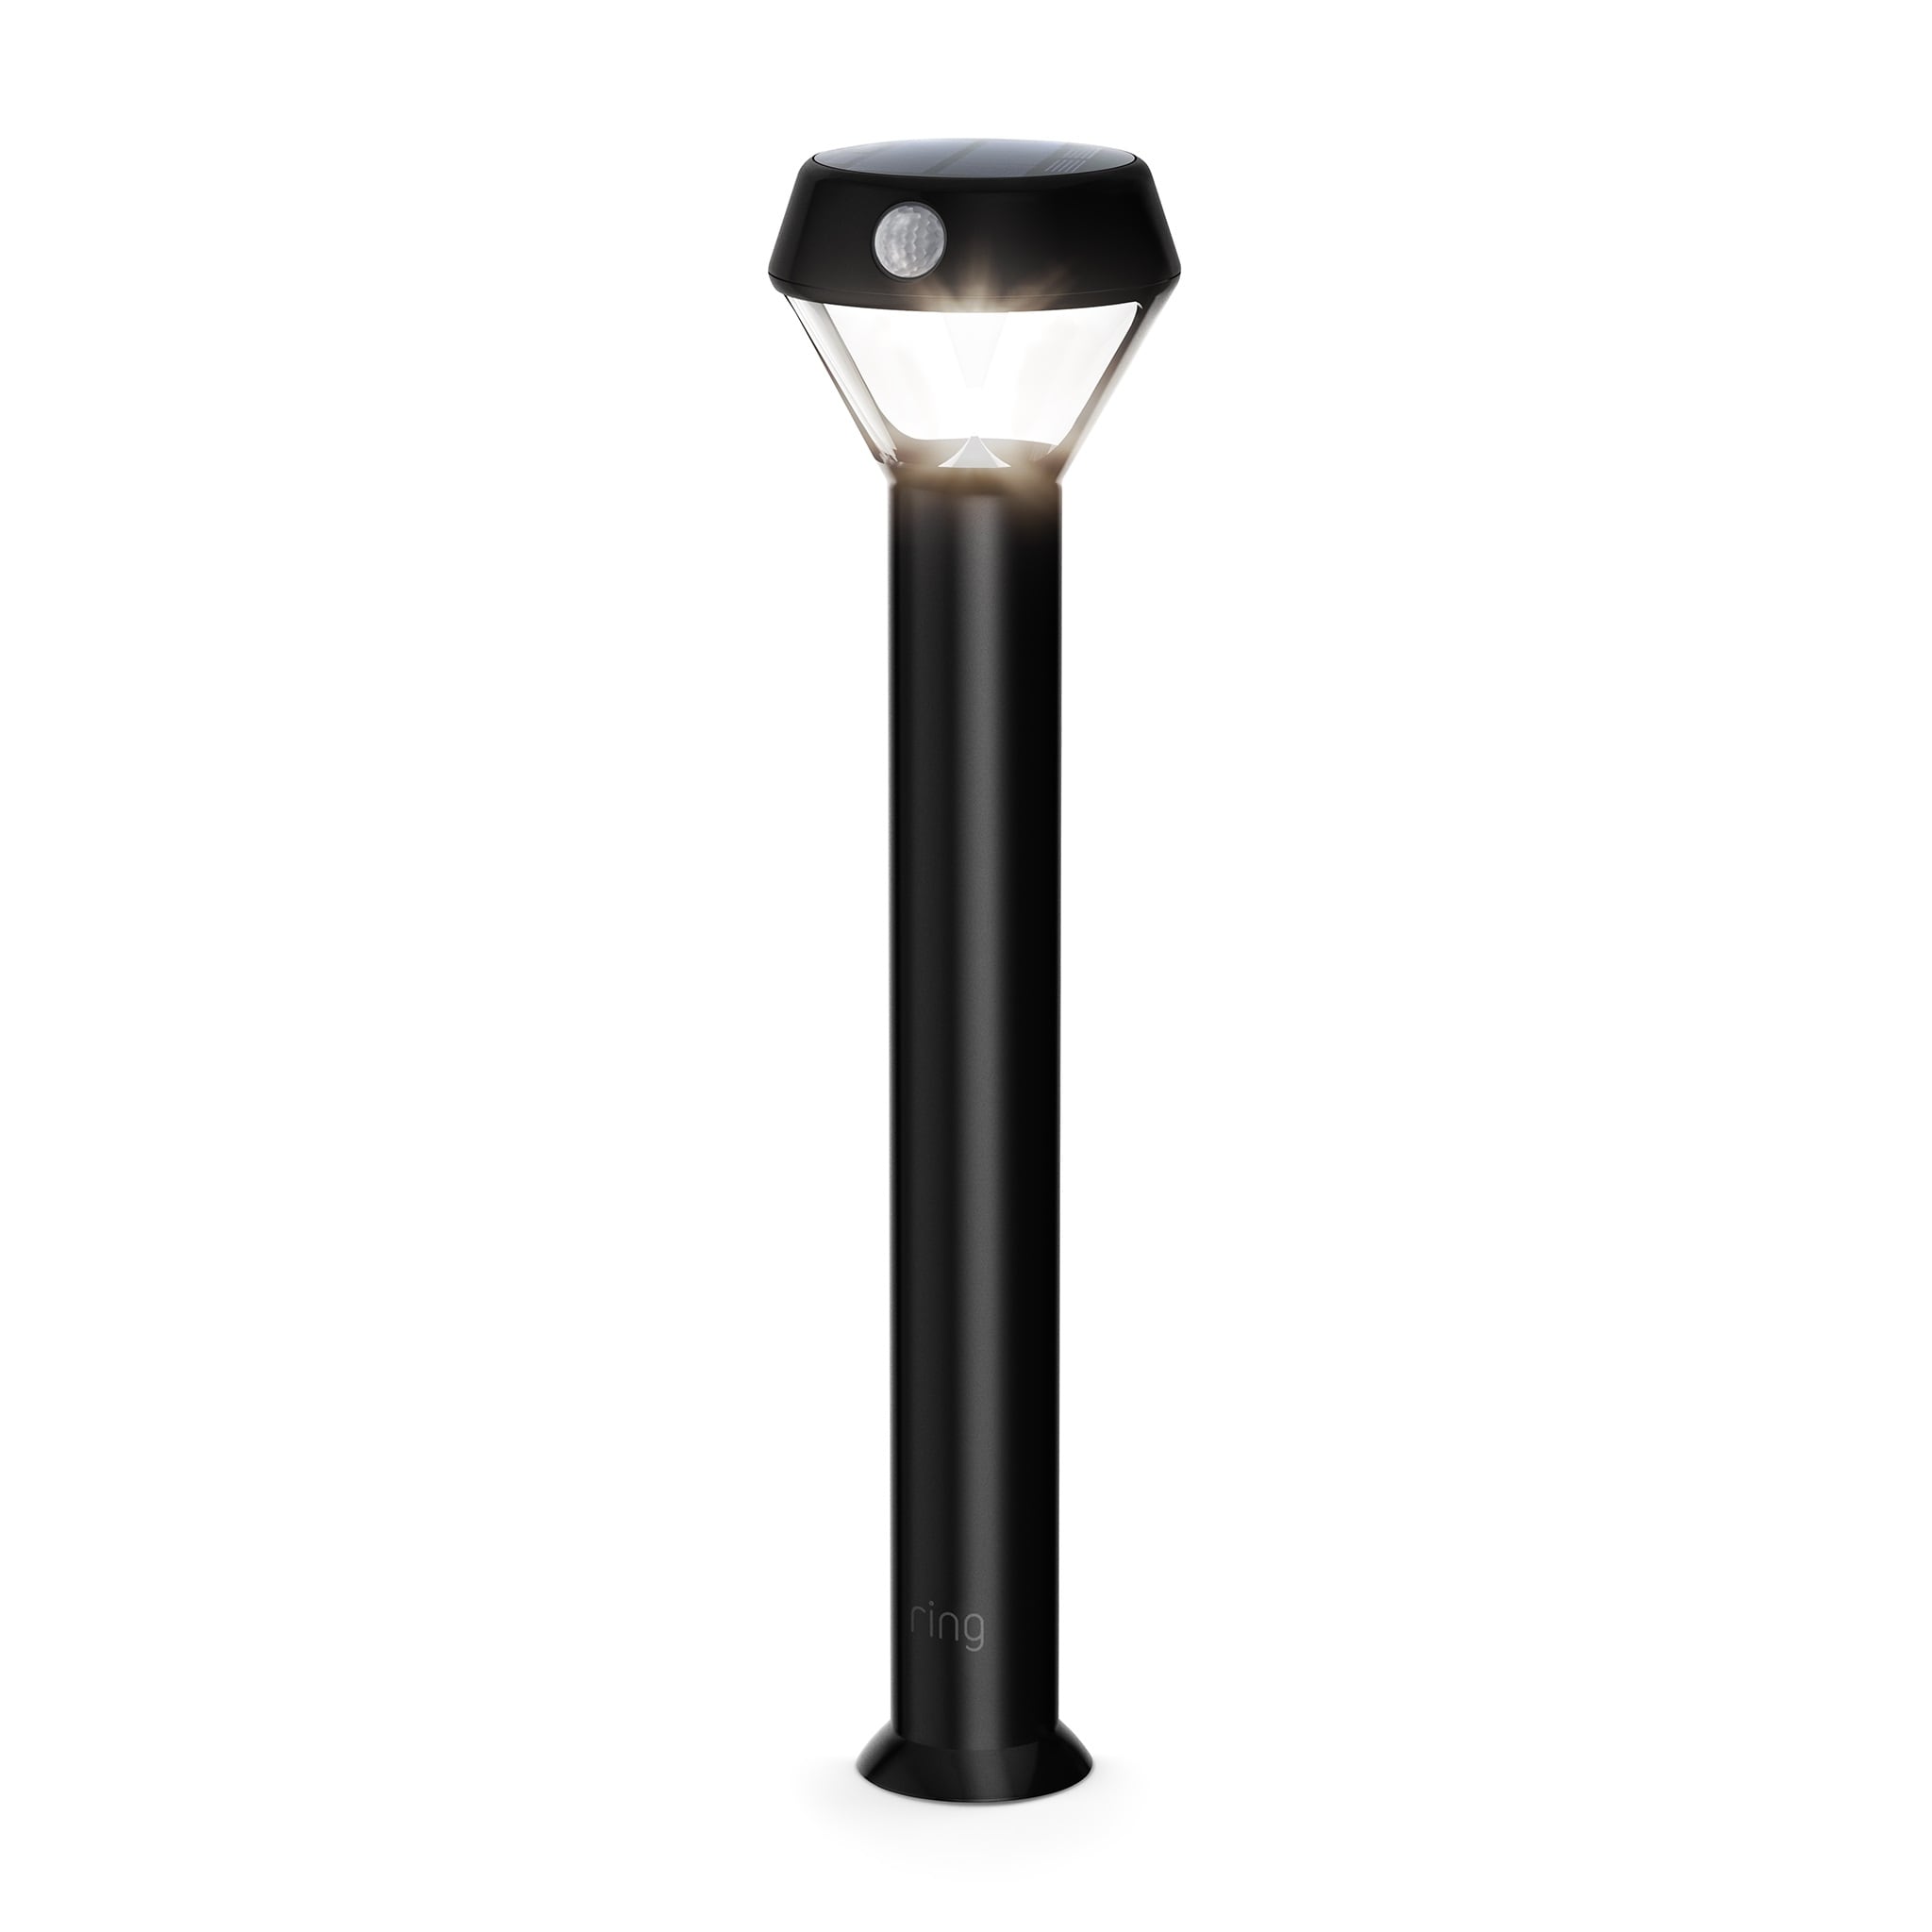 Ring 5AT1S6-BEN0 Smart Lighting - Solar Powered-Motion Activated LED Security Path Light with 80 Lumens - Black